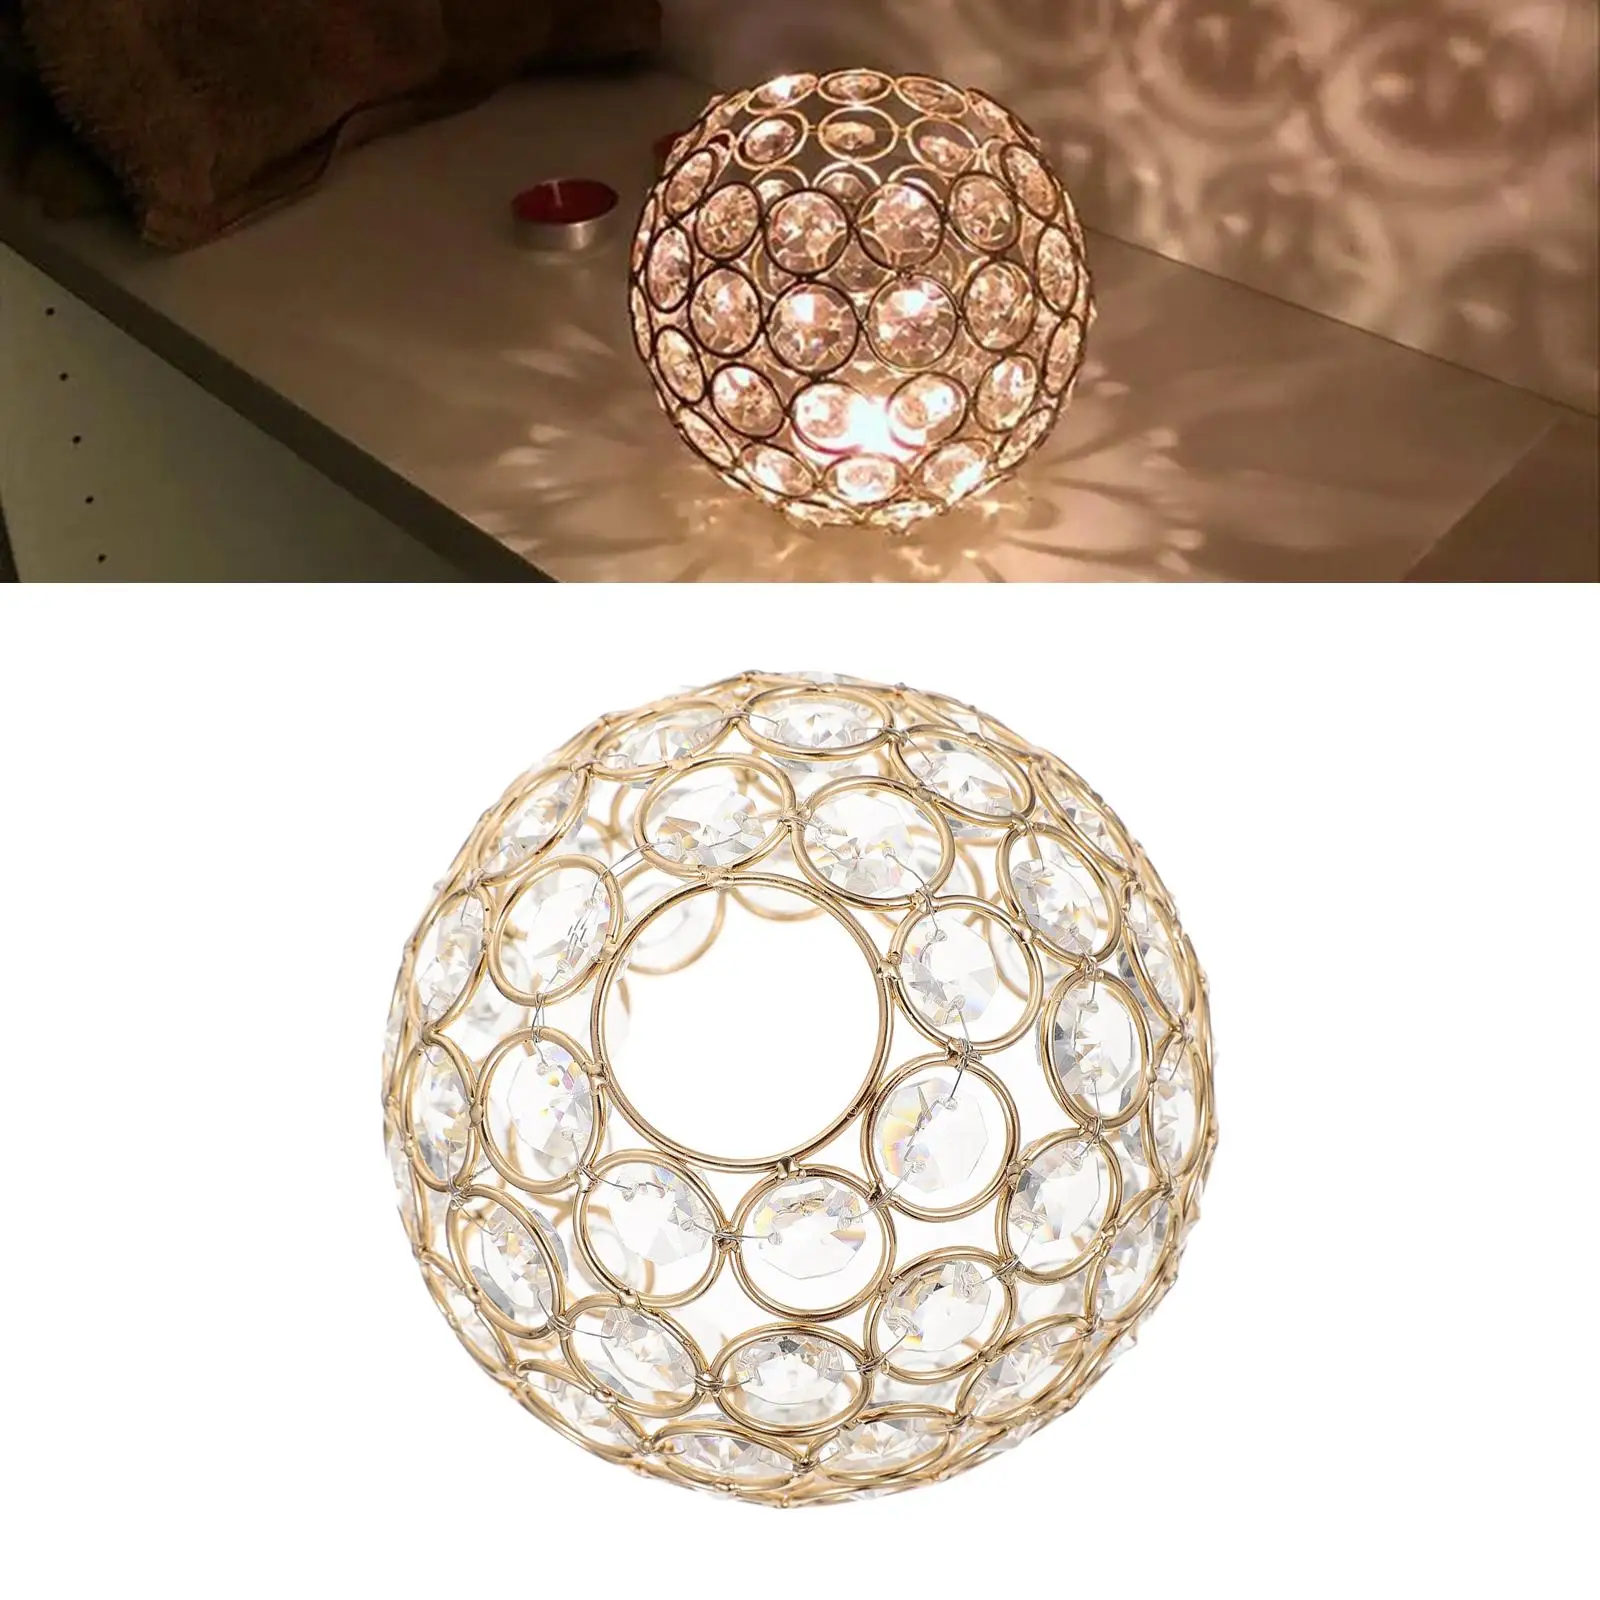 Ceiling Light Shade Replacement Cover Wedding Fitting Home Crystal Lampshade